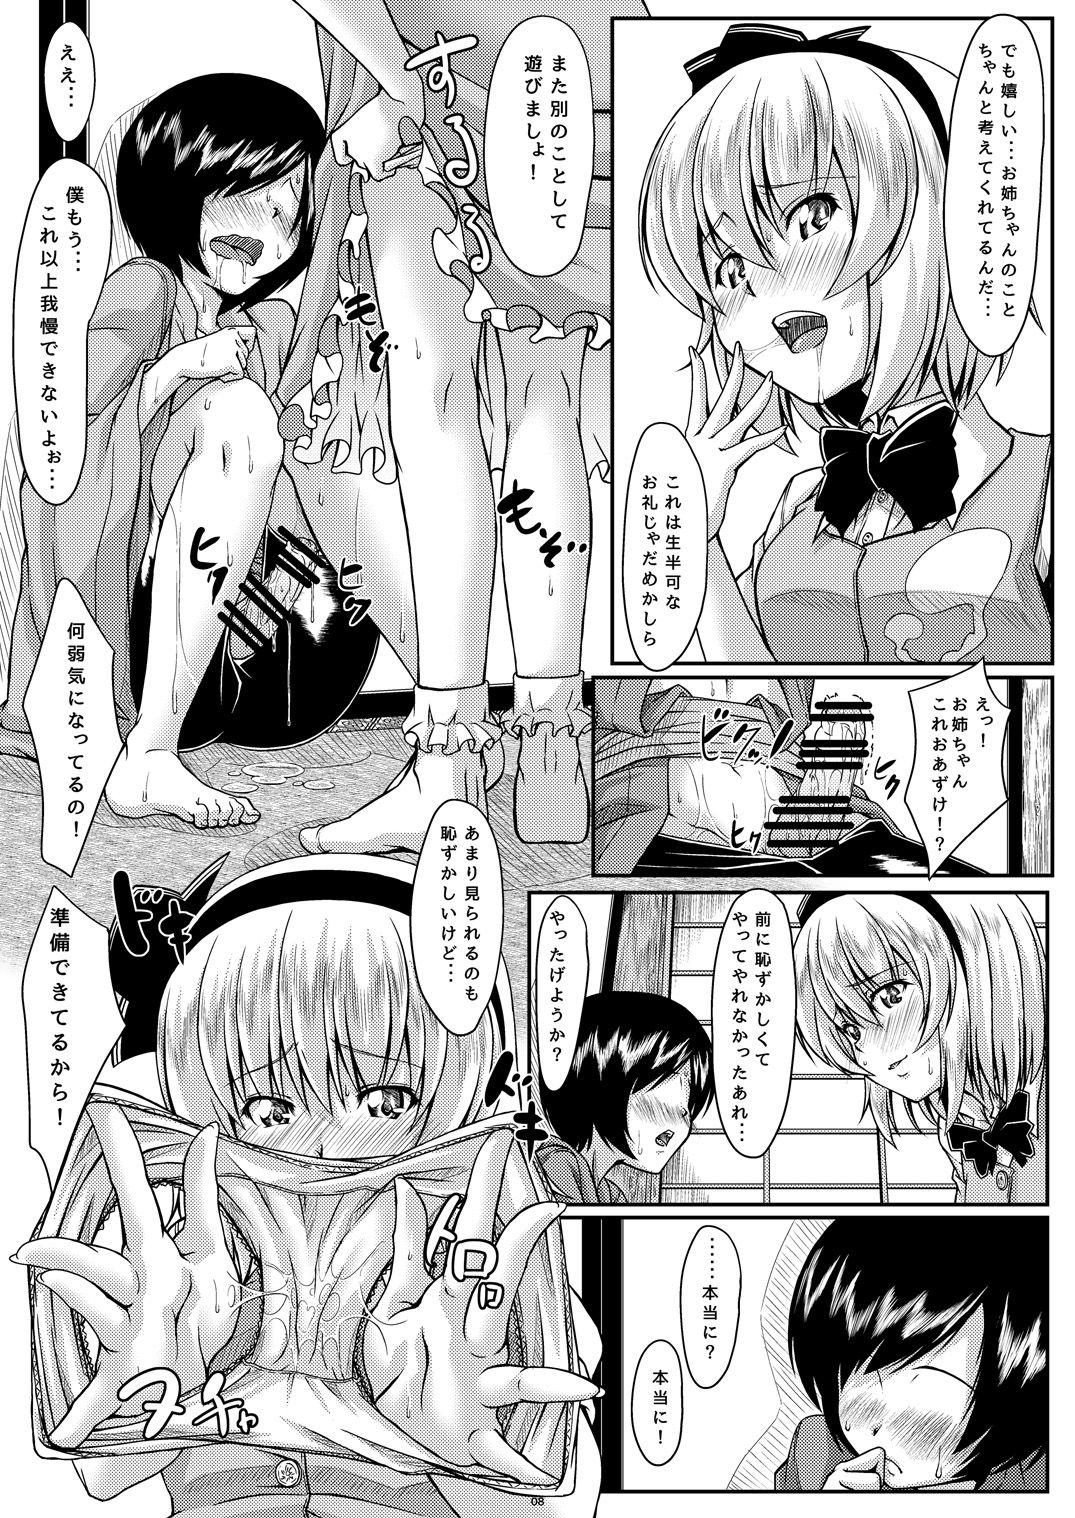 Fingering Onee-chan to no Myon na Kankei - Touhou project Petite Girl Porn - Page 7